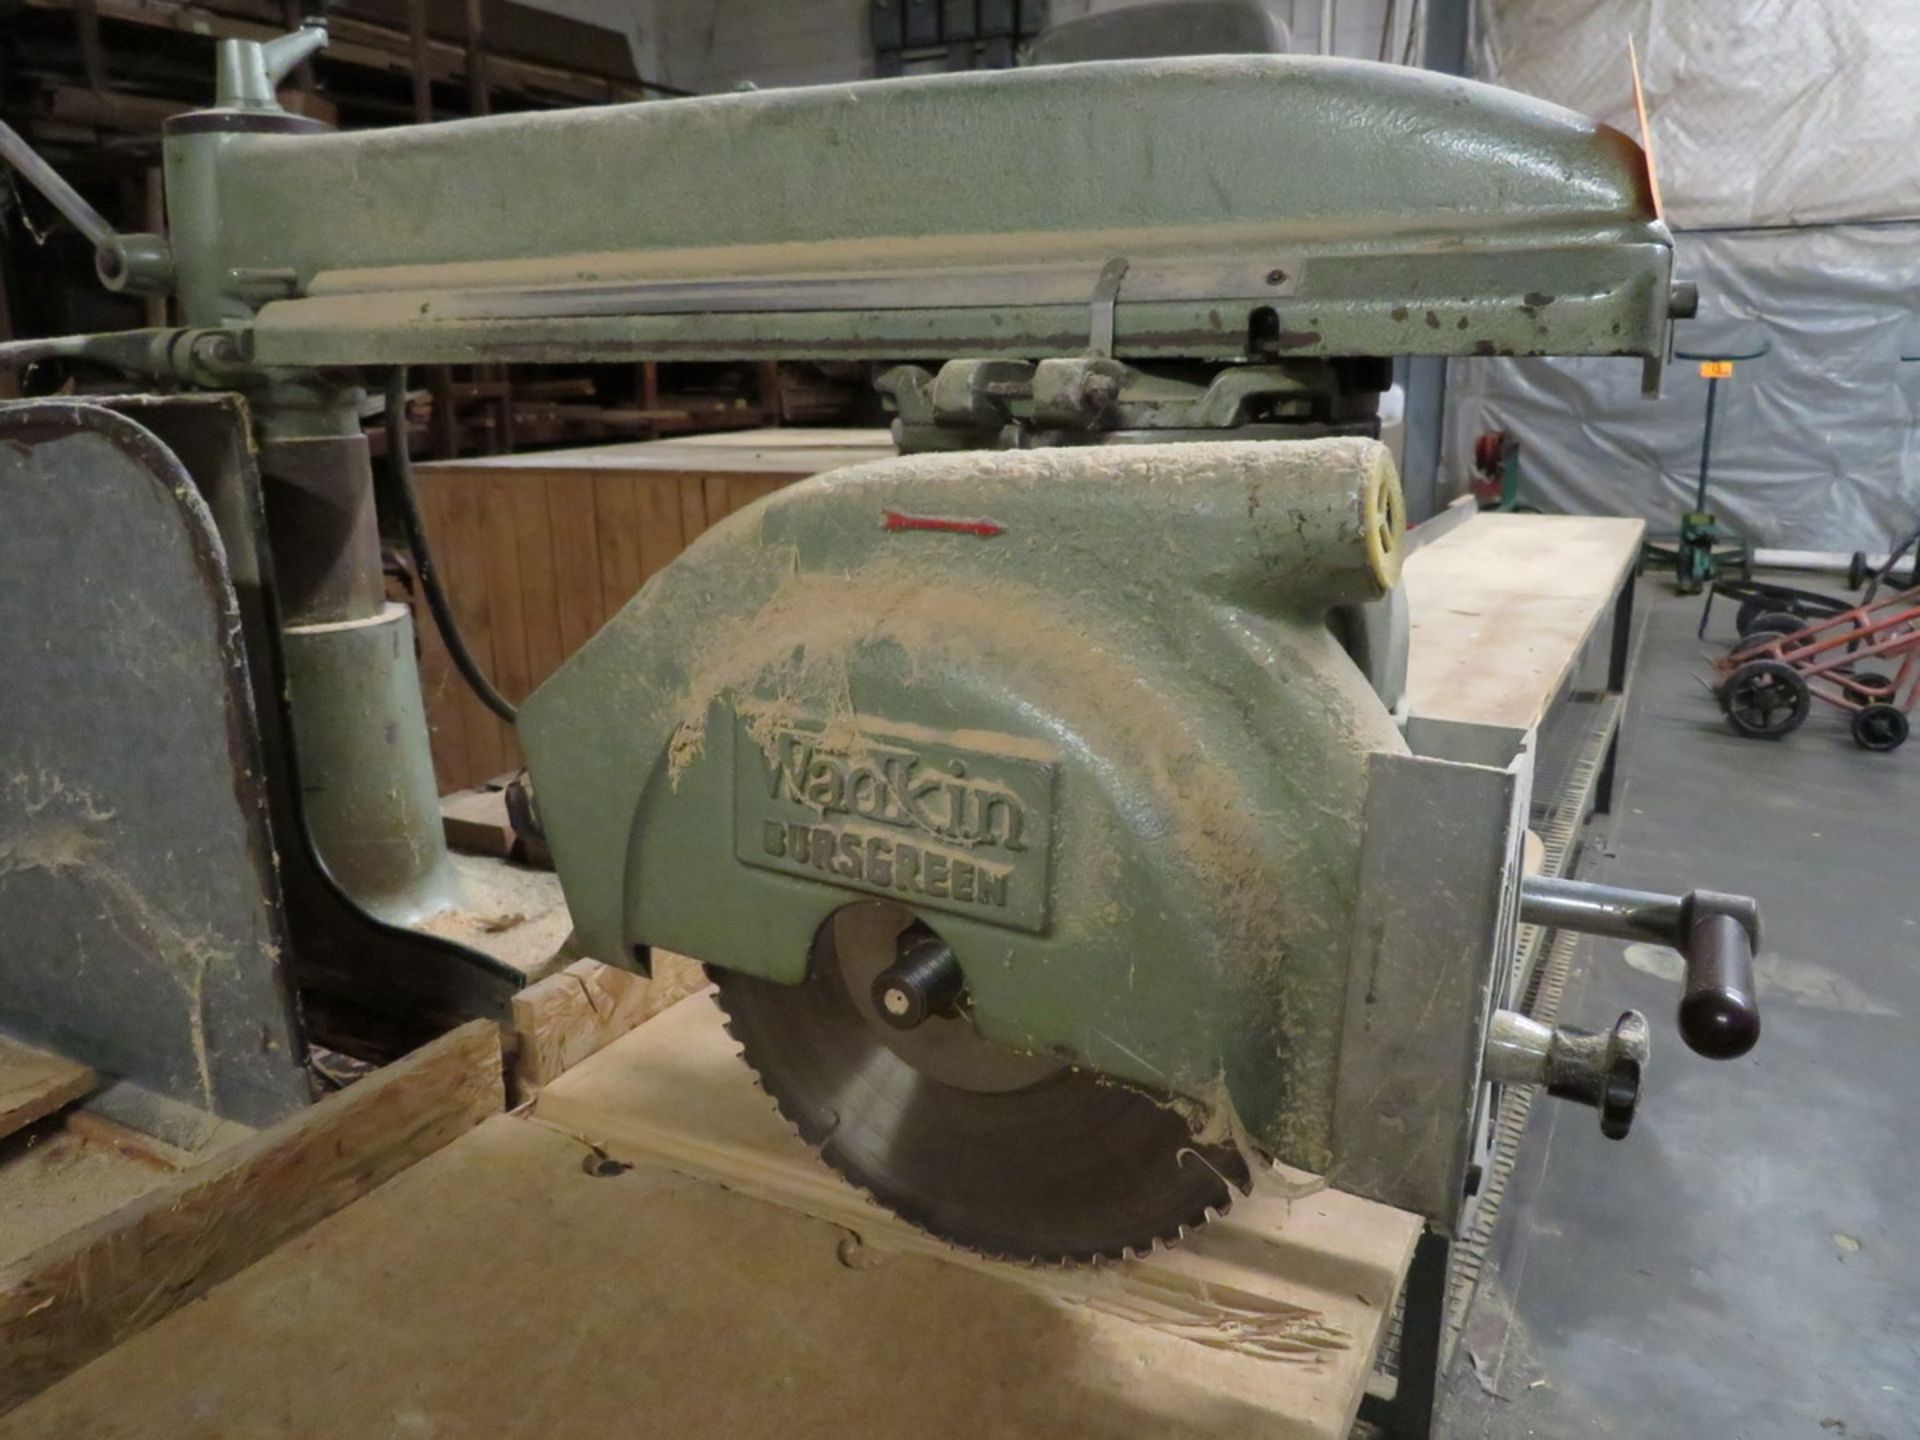 Wadkin Bursgreen Radial Saw 10", with Support Stand and Conveyor [Loc: Church Hill] - Image 3 of 3